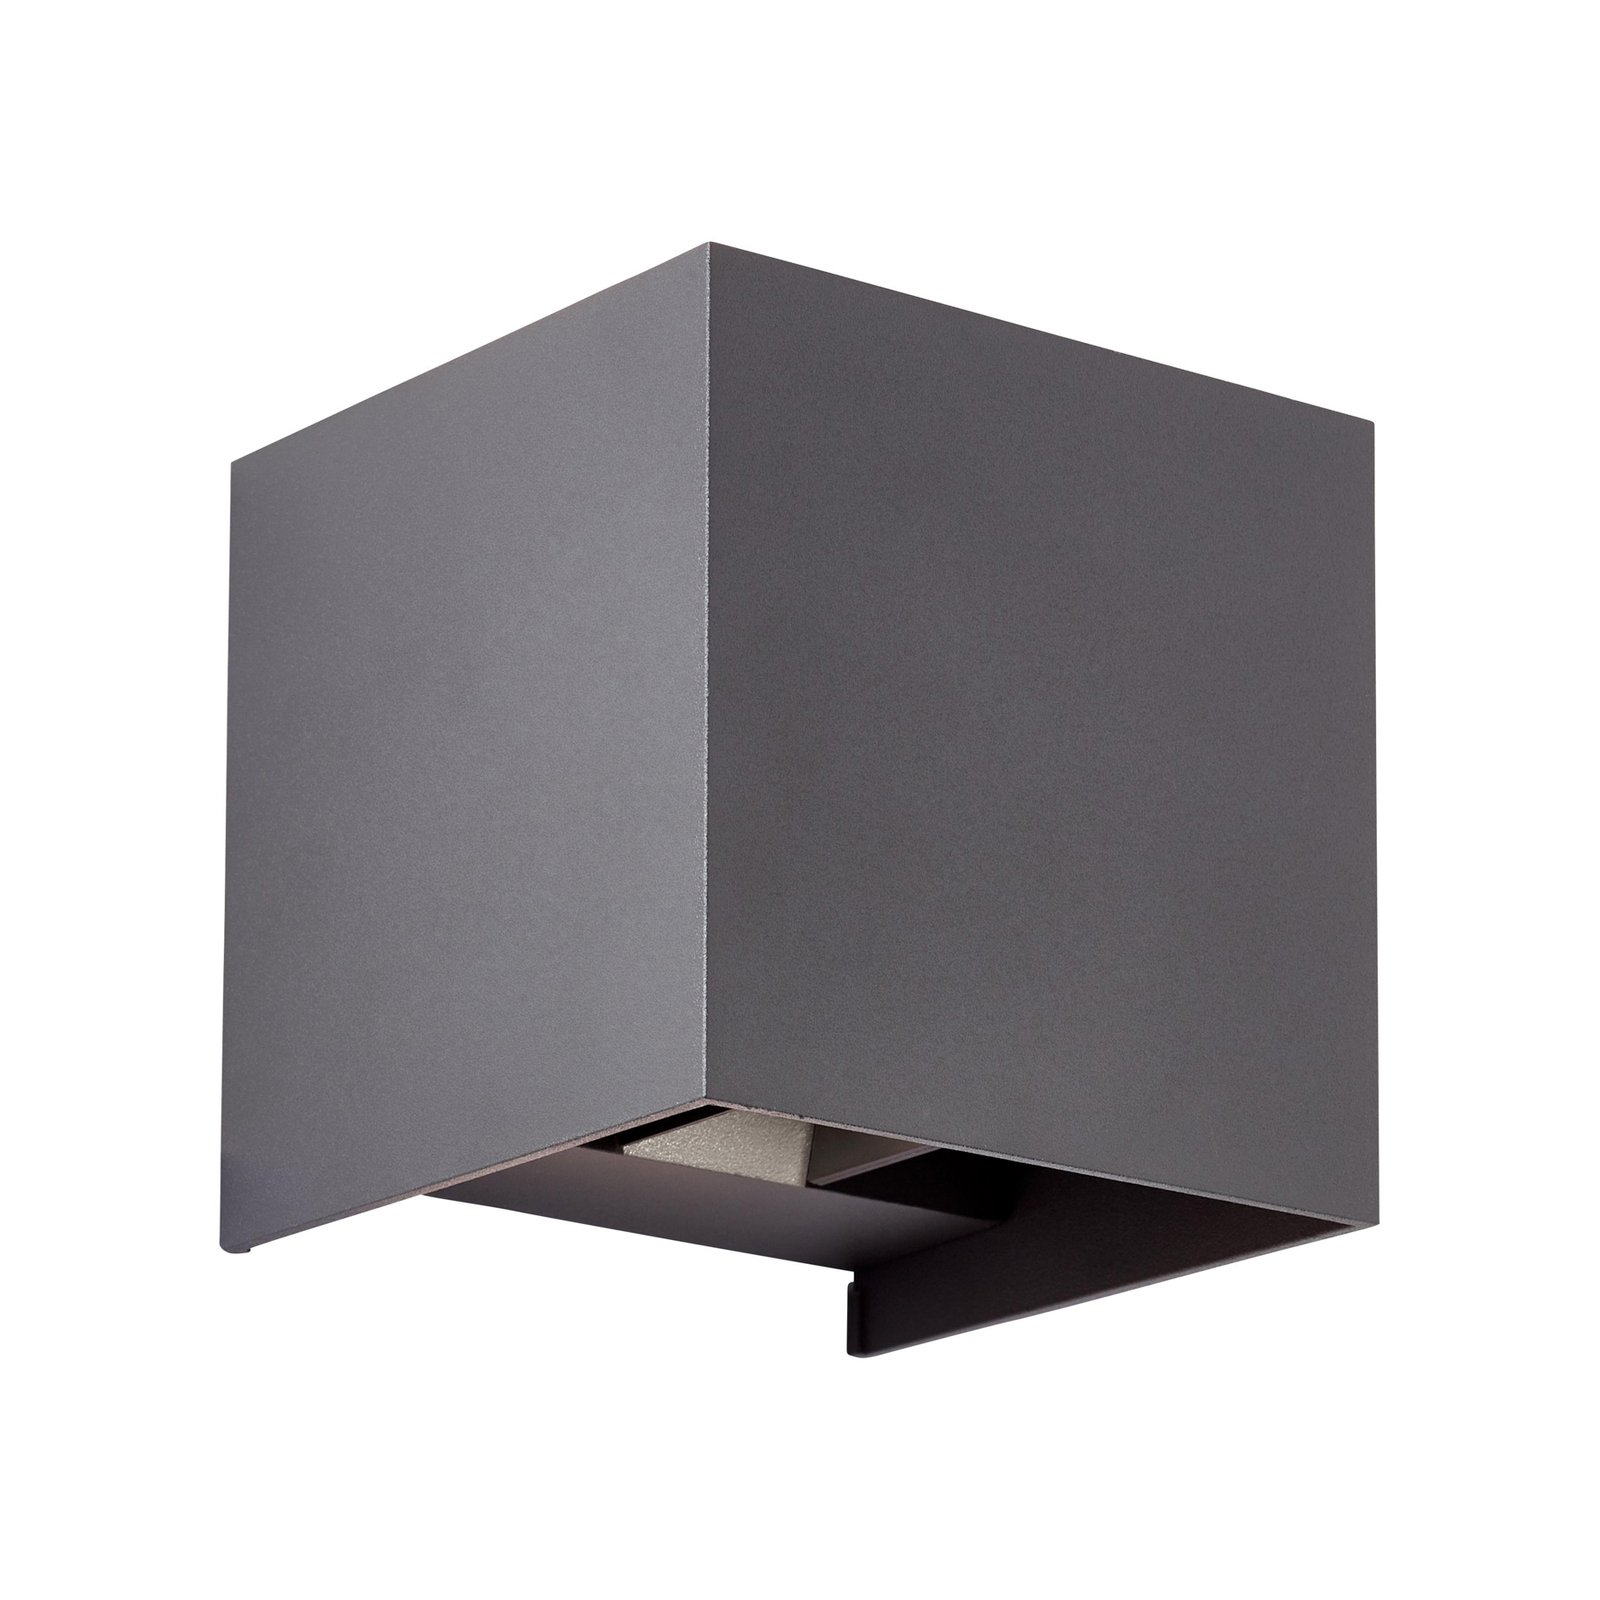 LED outdoor wall light Hilly, height 10 cm, dark grey, metal